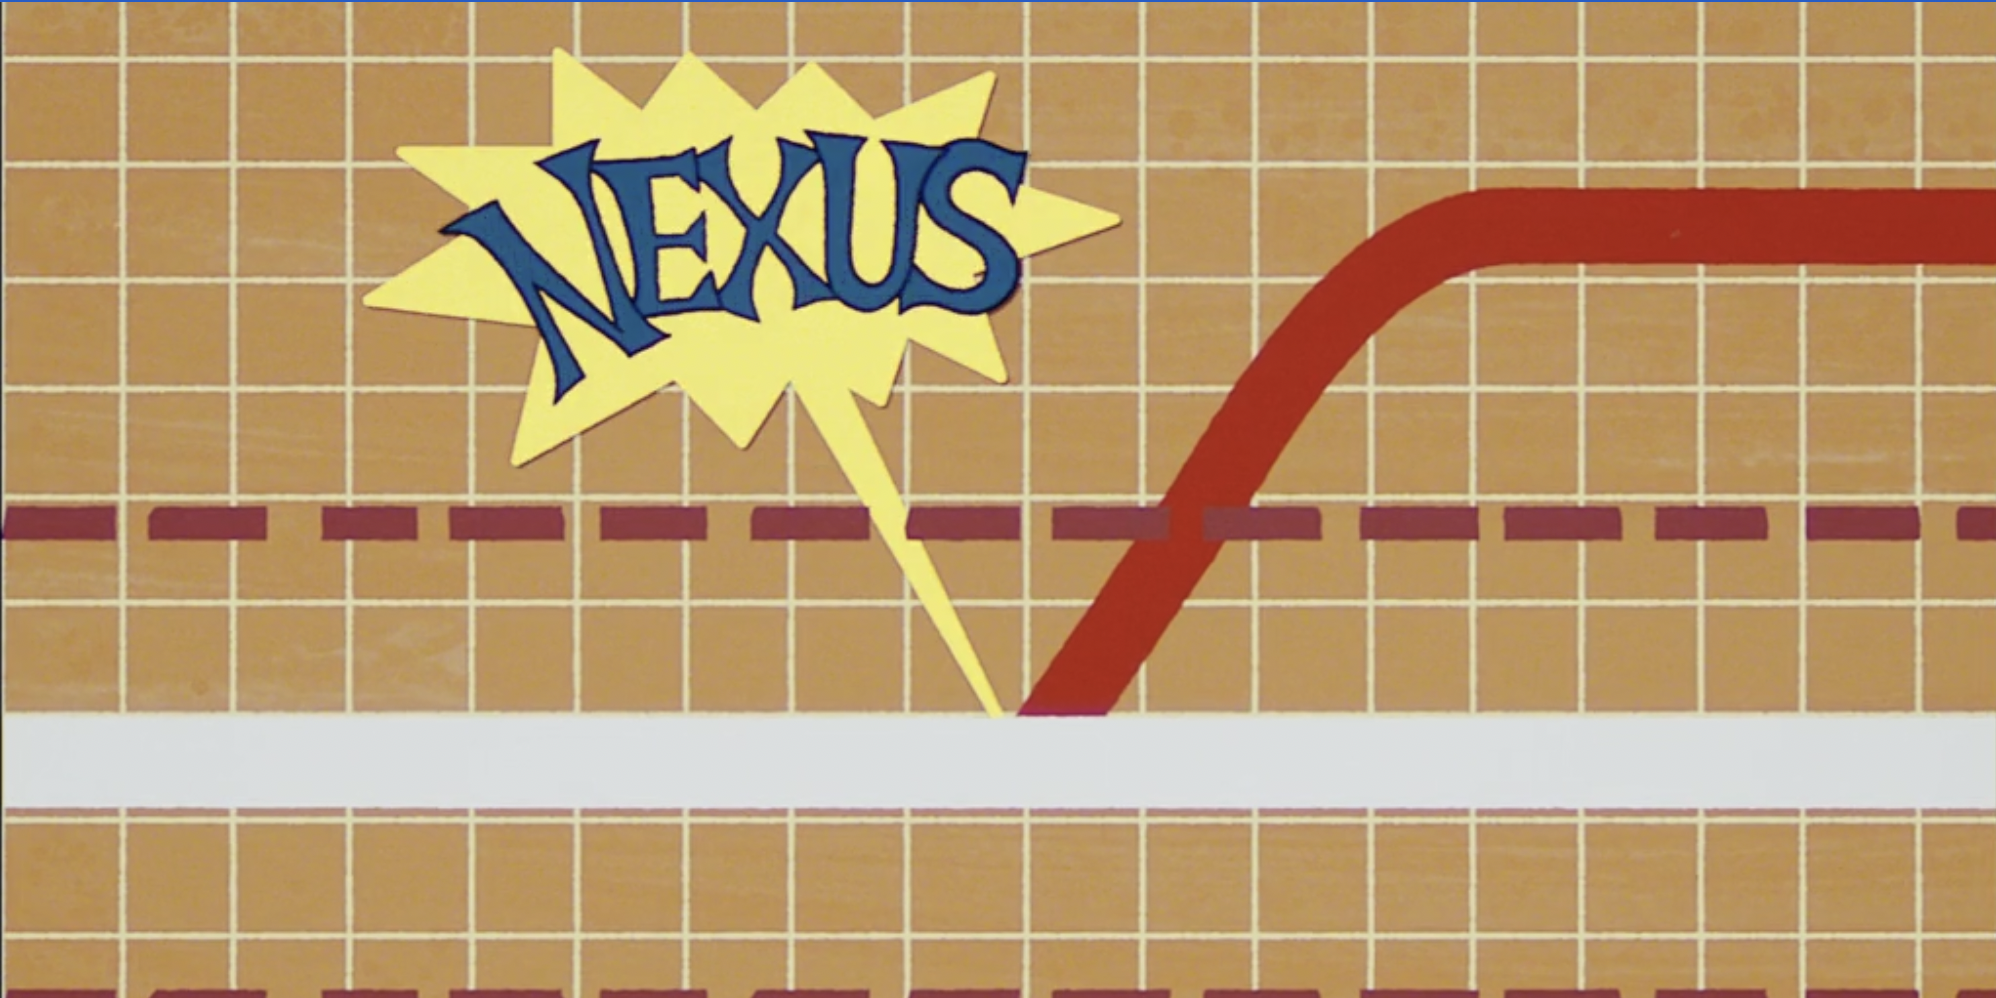 Nexus is a reference to comics on Loki